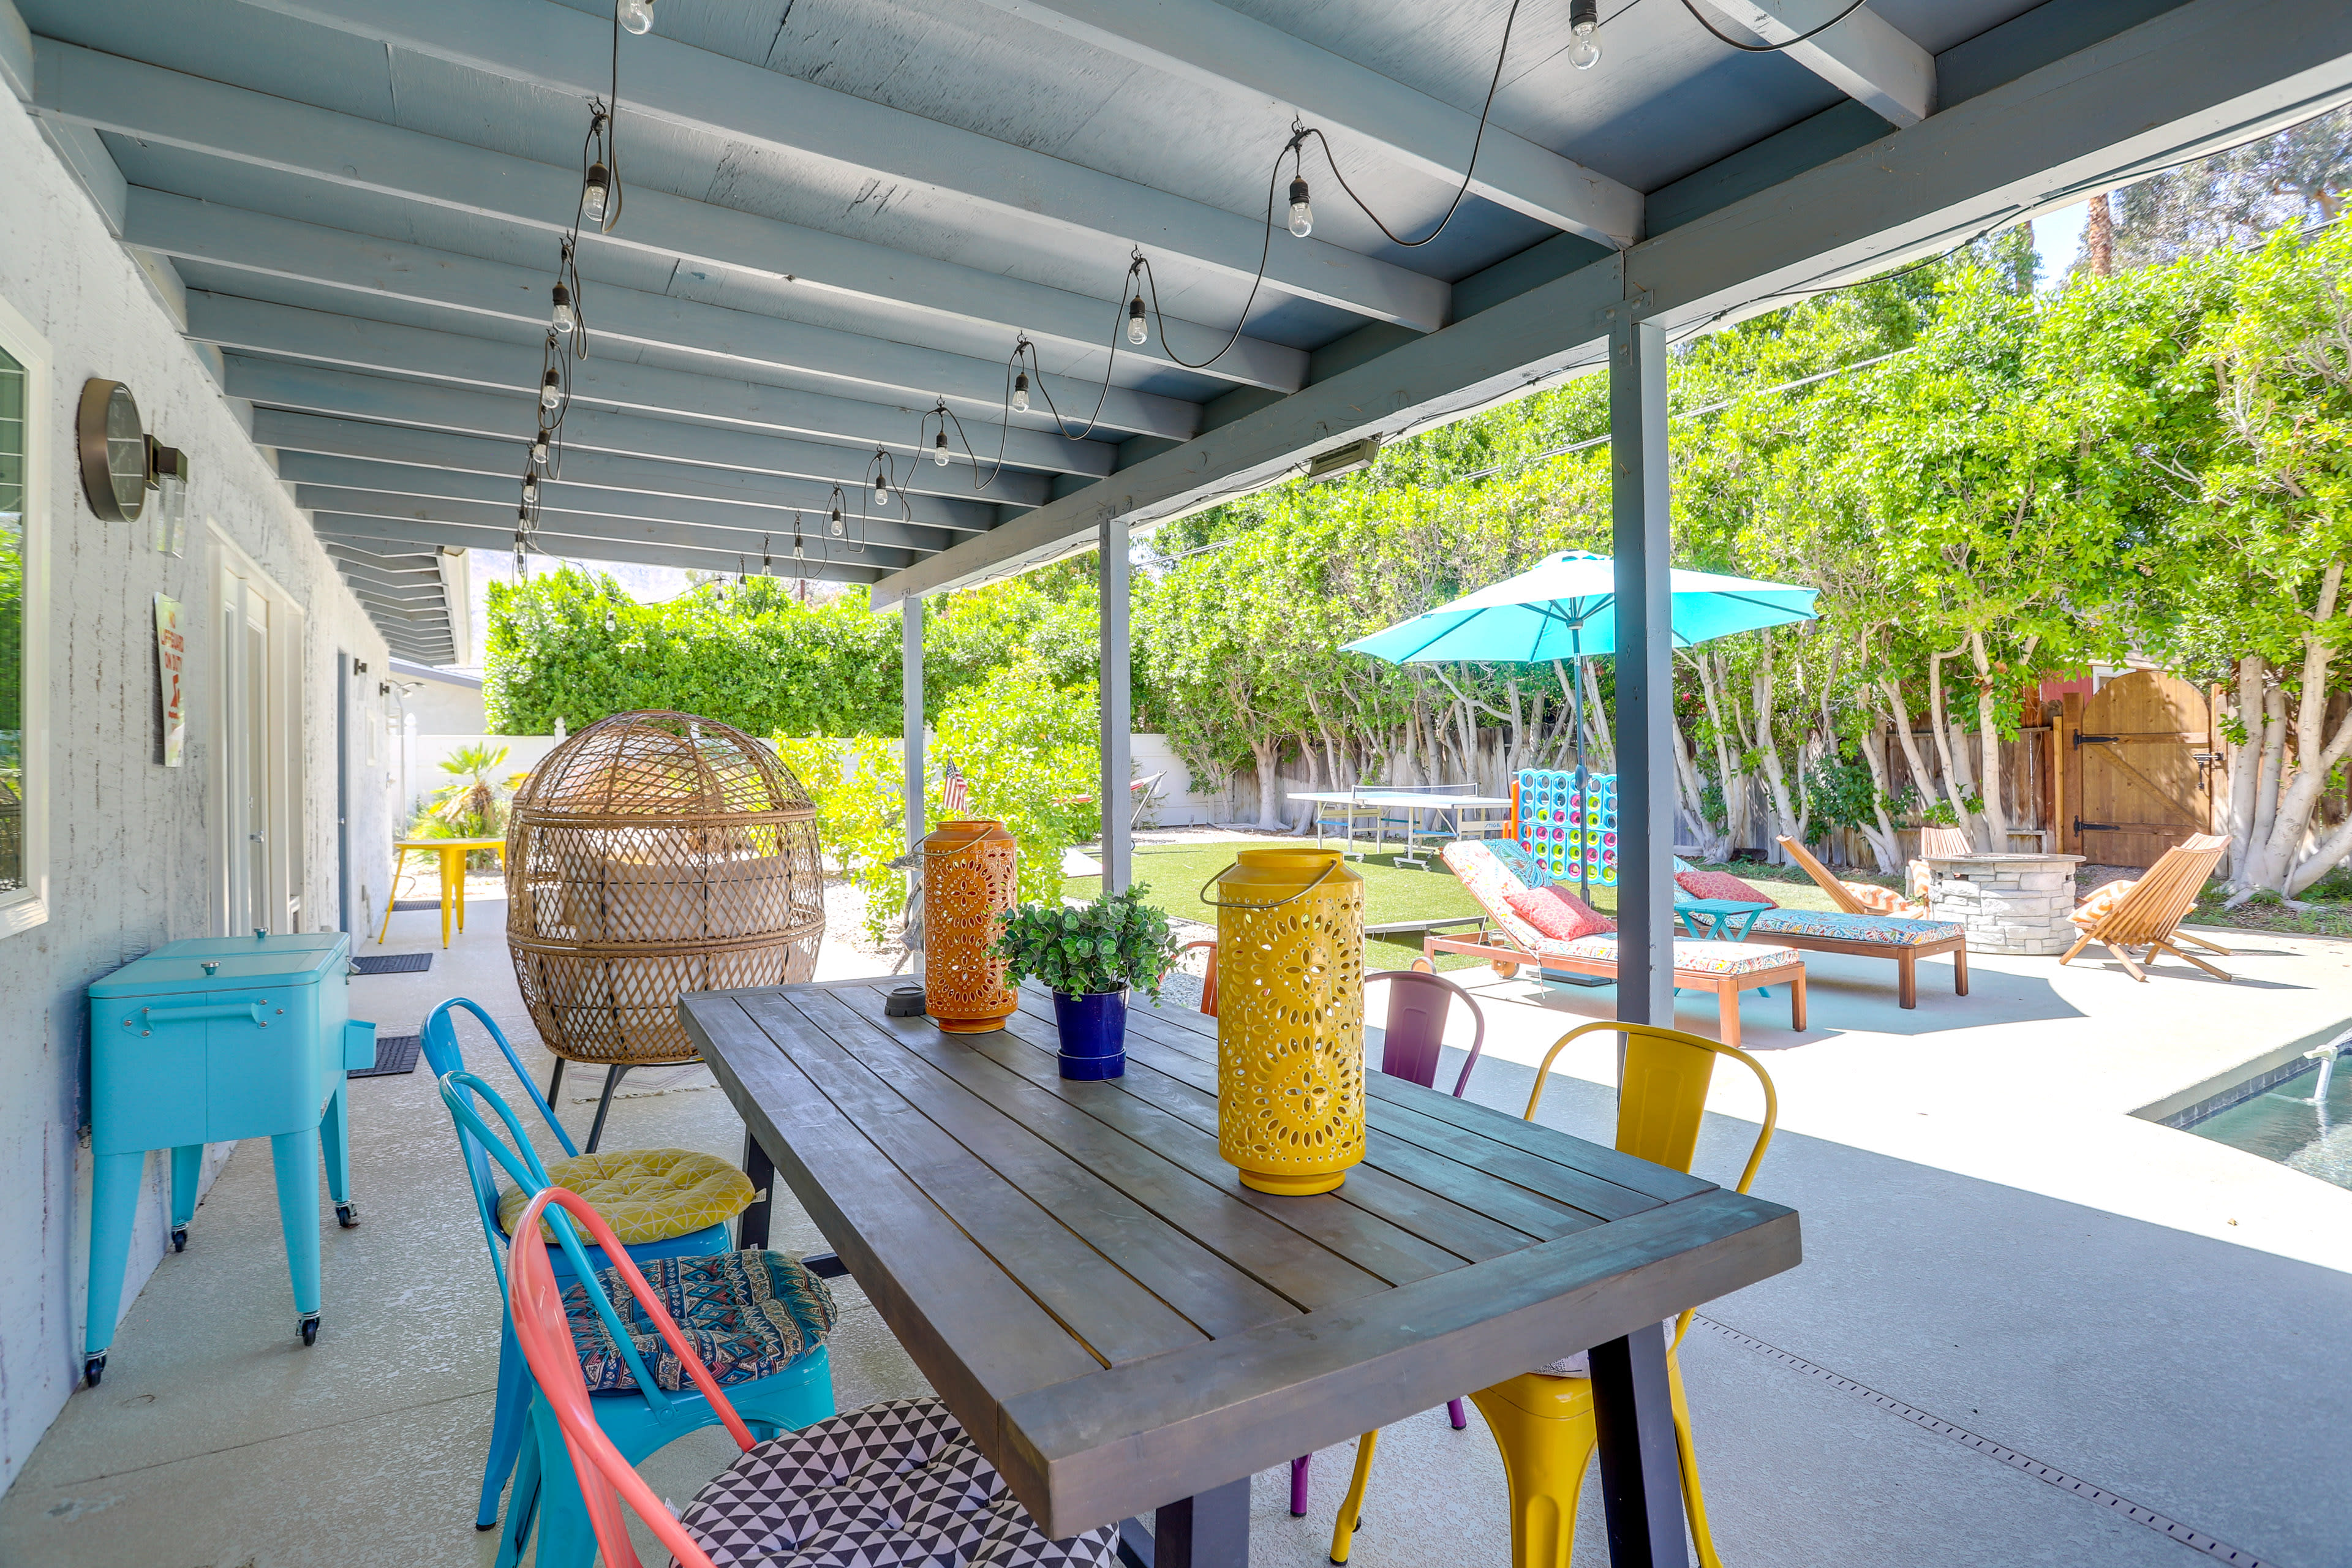 Shared Yard | Outdoor Seating & Dining Areas